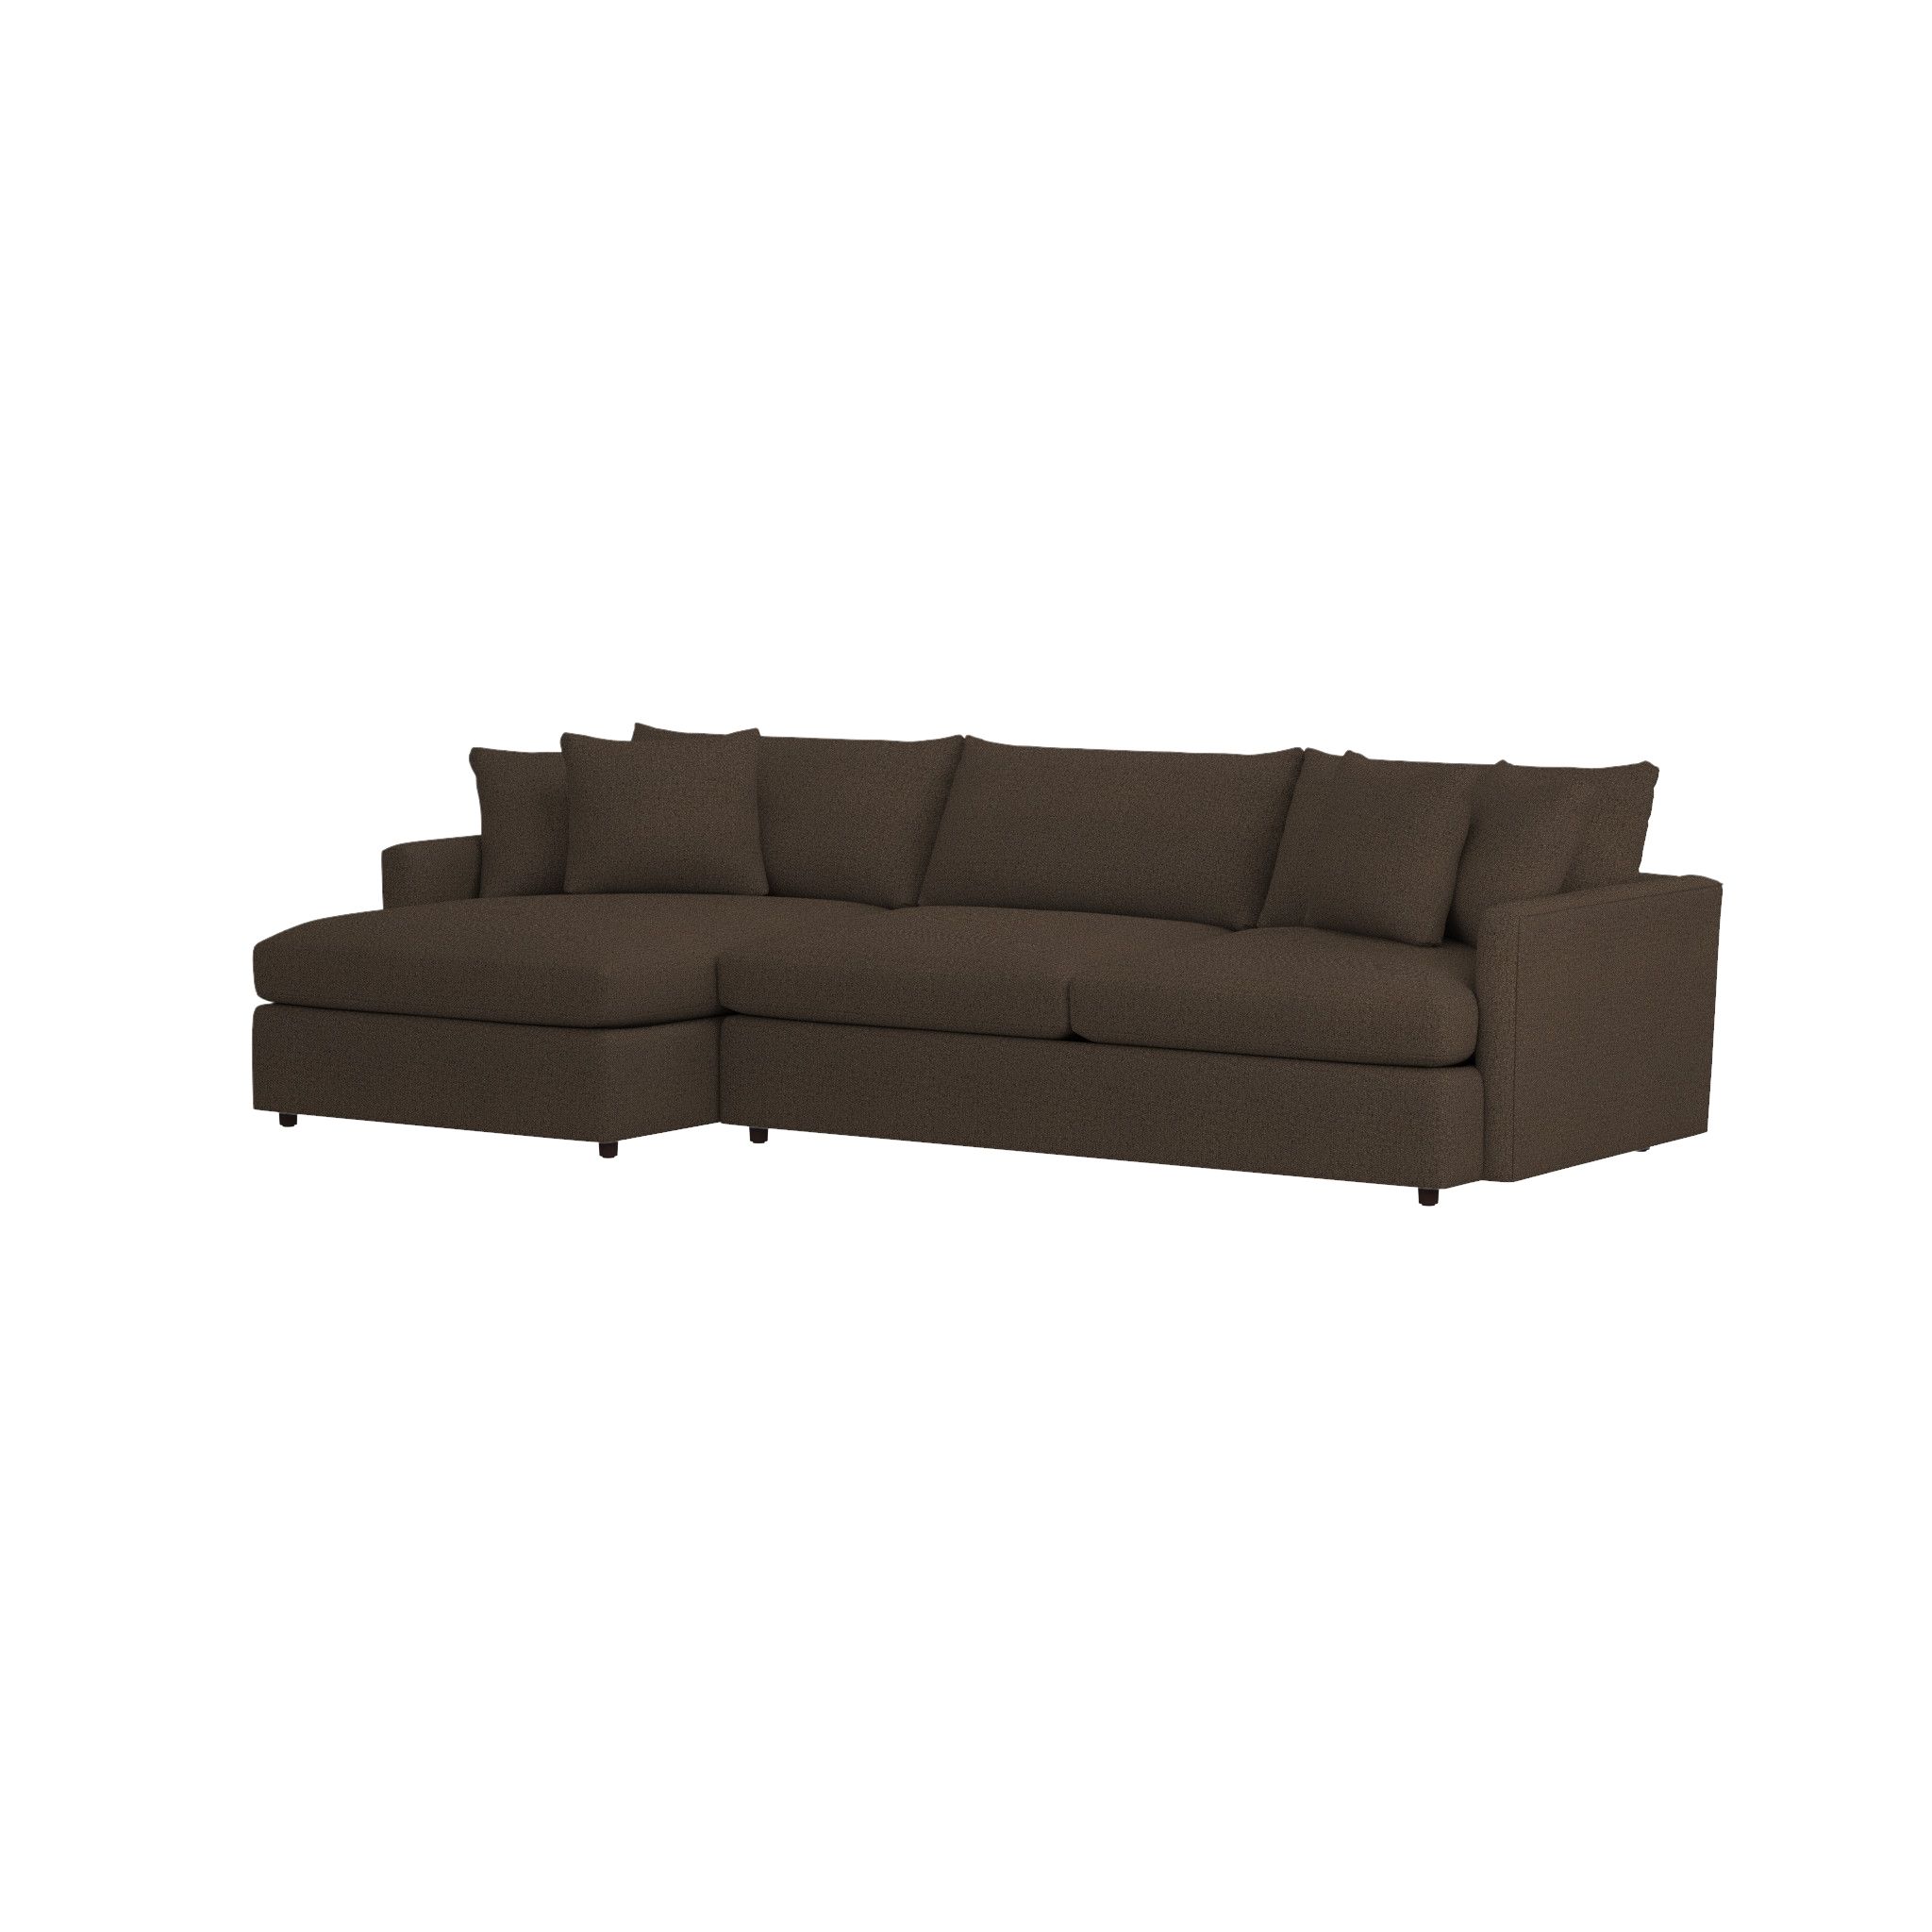 Lounge Ii Grey Chaise Lounge Sectional | Crate And Barrel For Crate And Barrel Sectional (View 9 of 15)